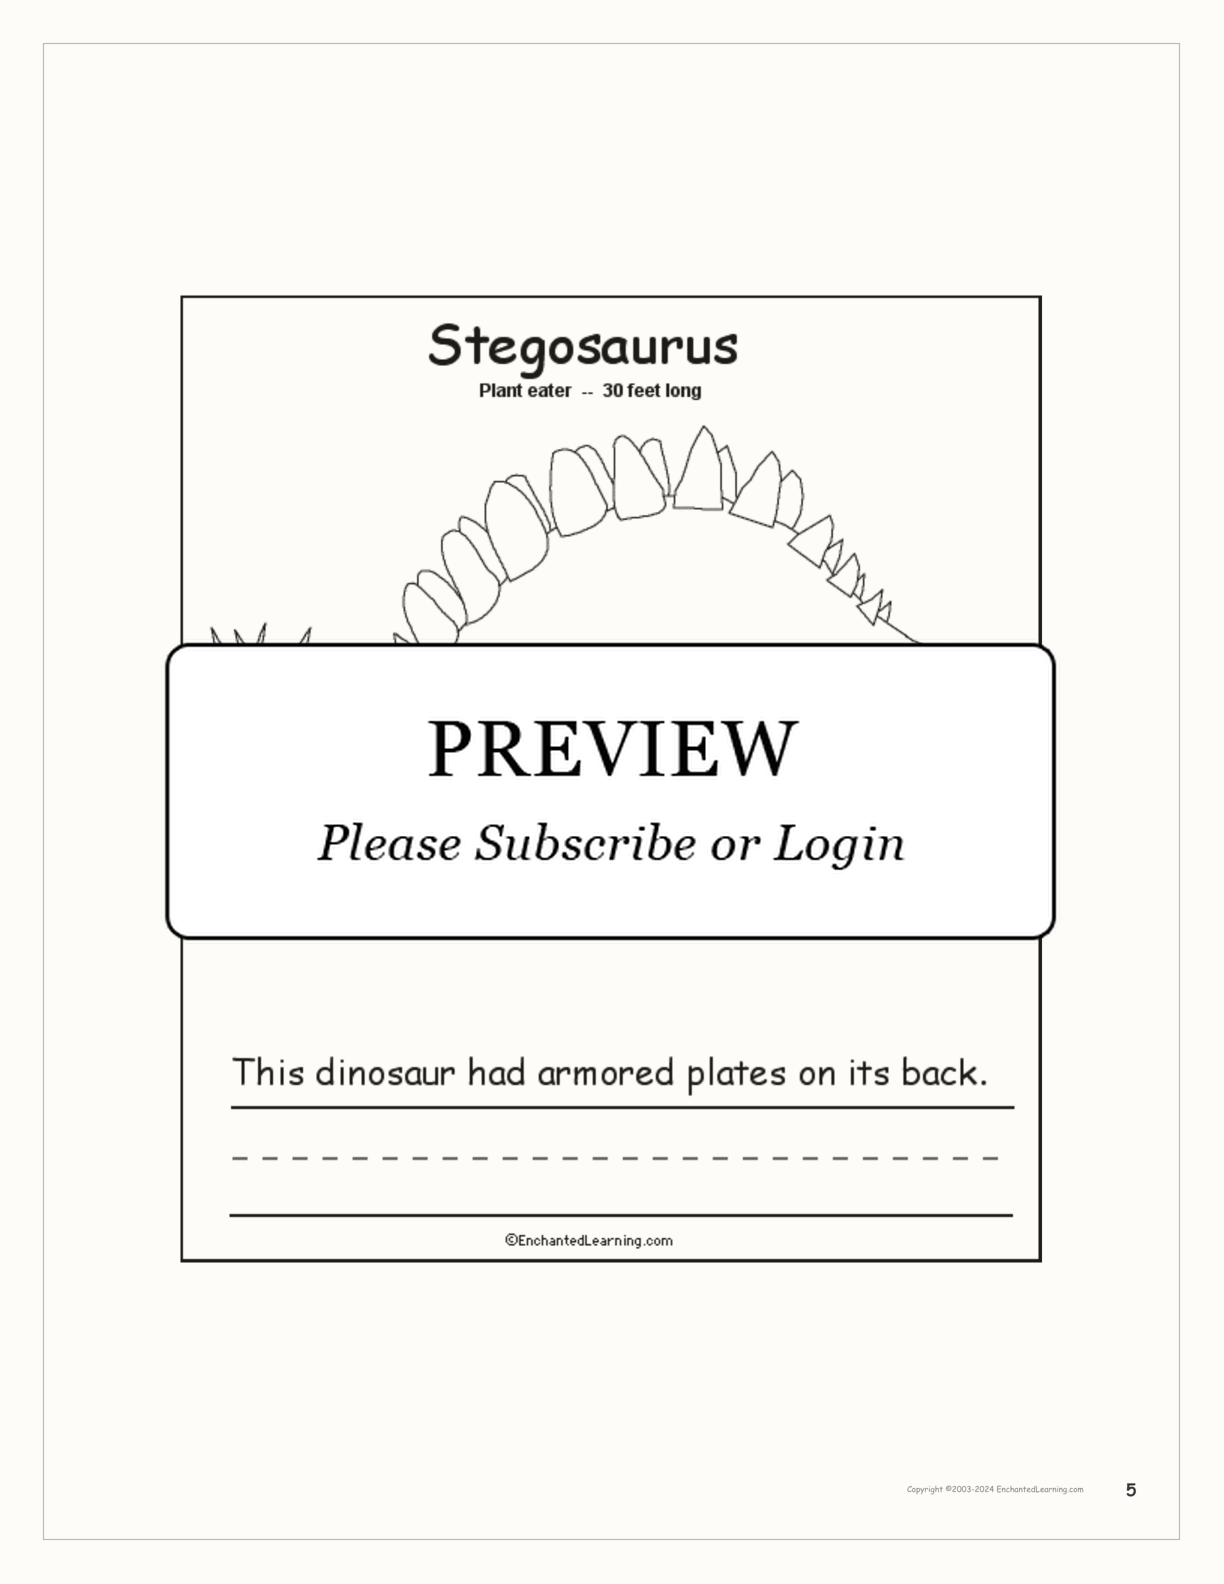 This Dinosaur... Early Reader Book interactive printout page 5